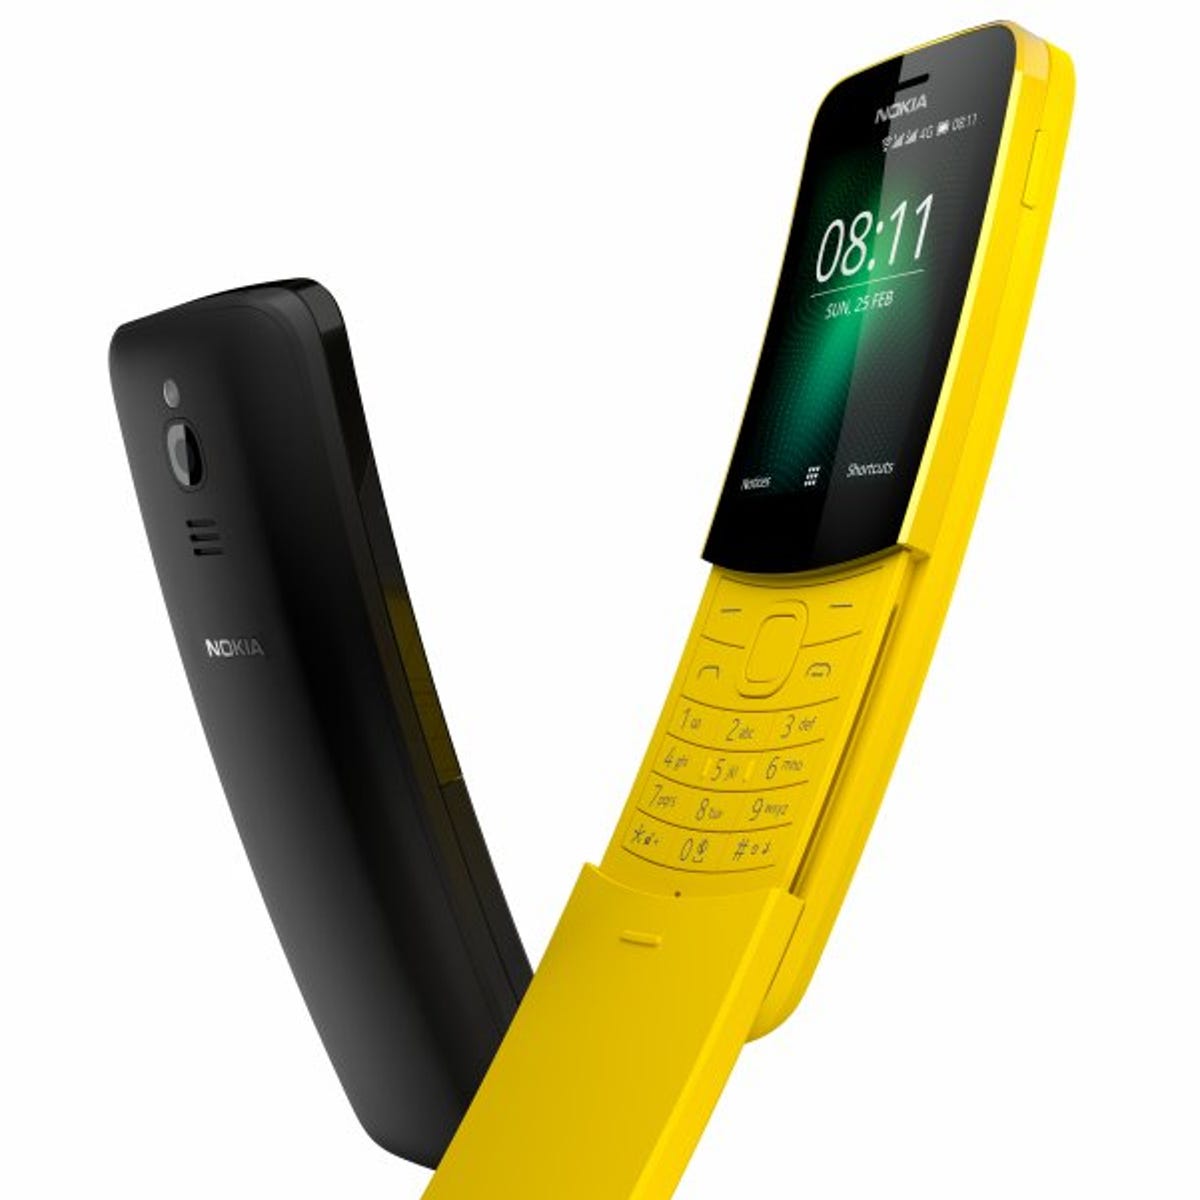 Nokia 8110 Matrix Slider Phone Is Back This Time It S Reloaded With 4g Zdnet